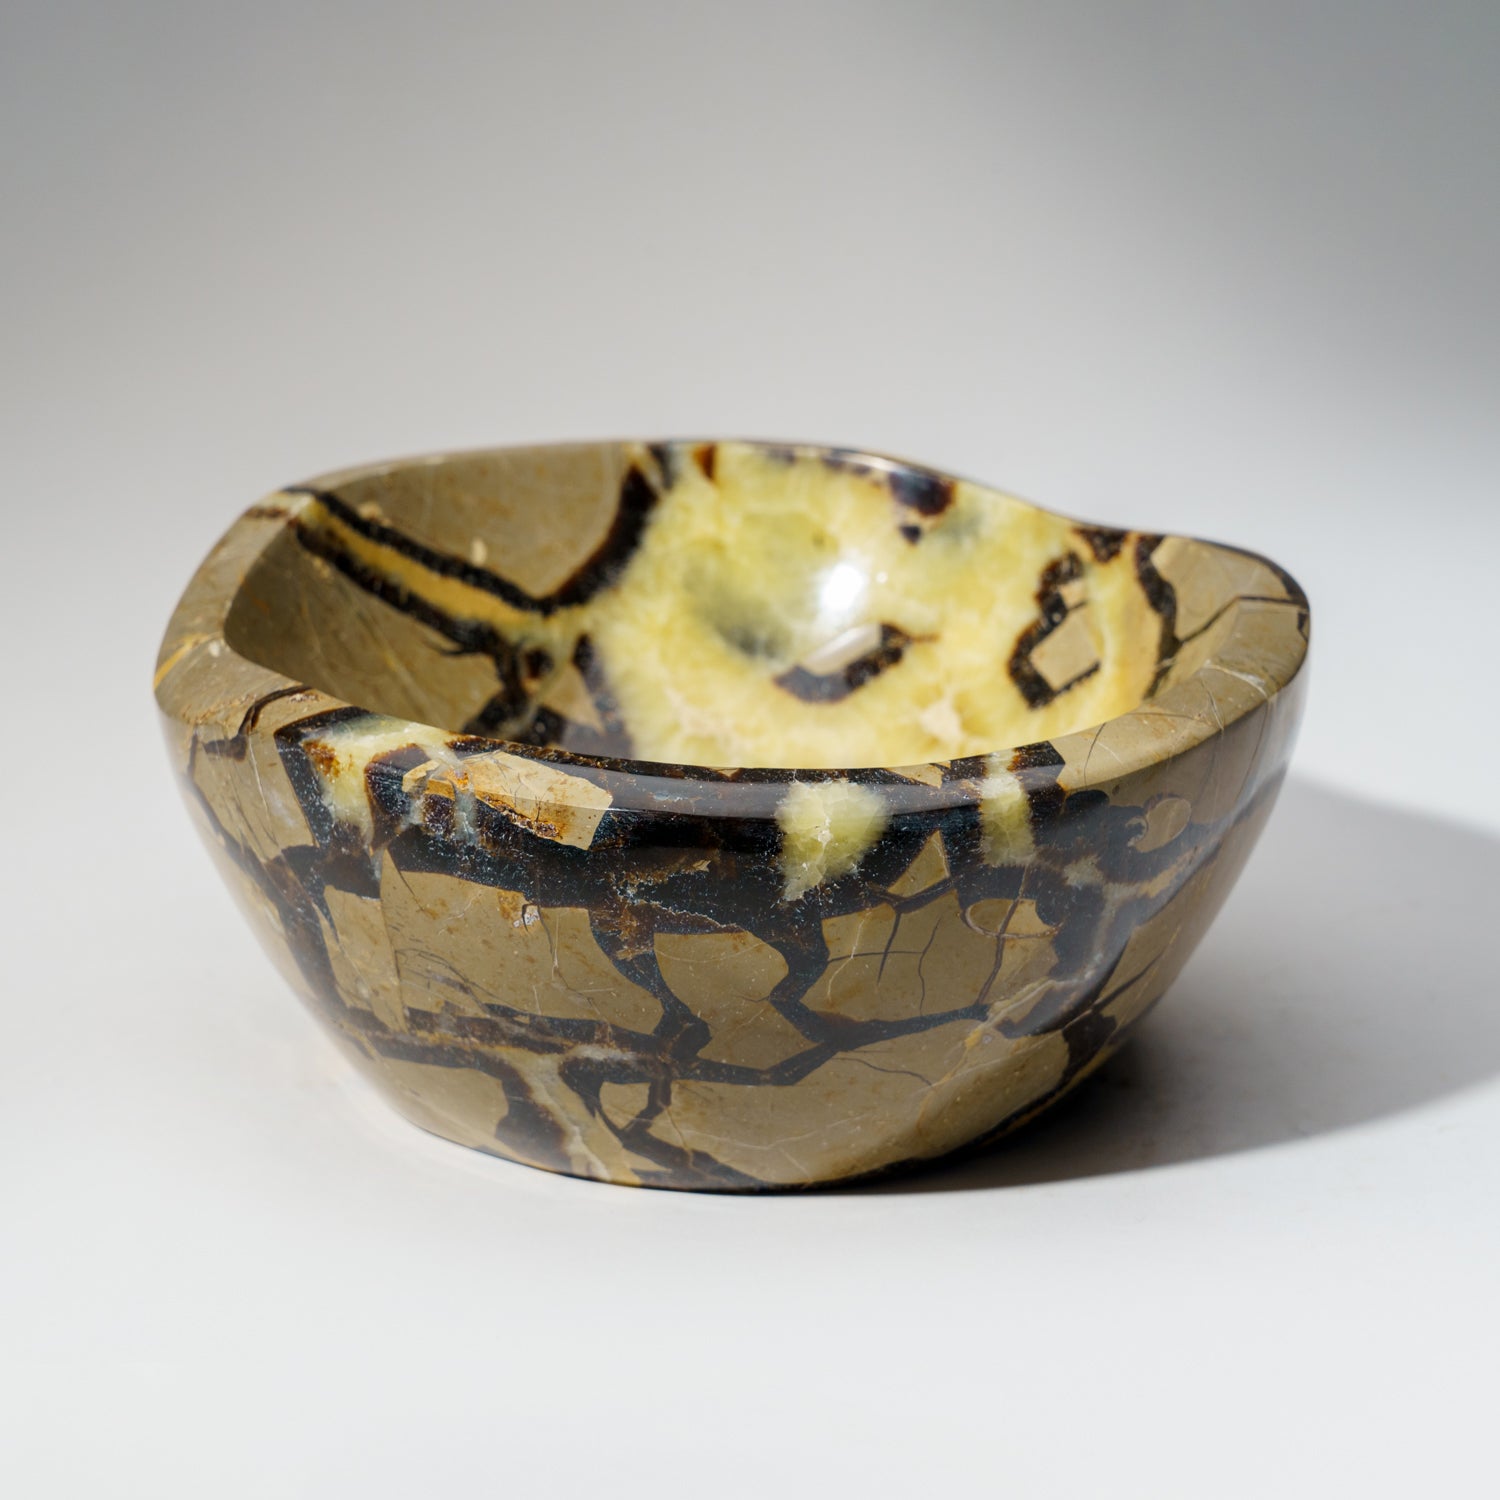 Genuine Polished Septarian Bowl from Madagascar (3.5 lbs)